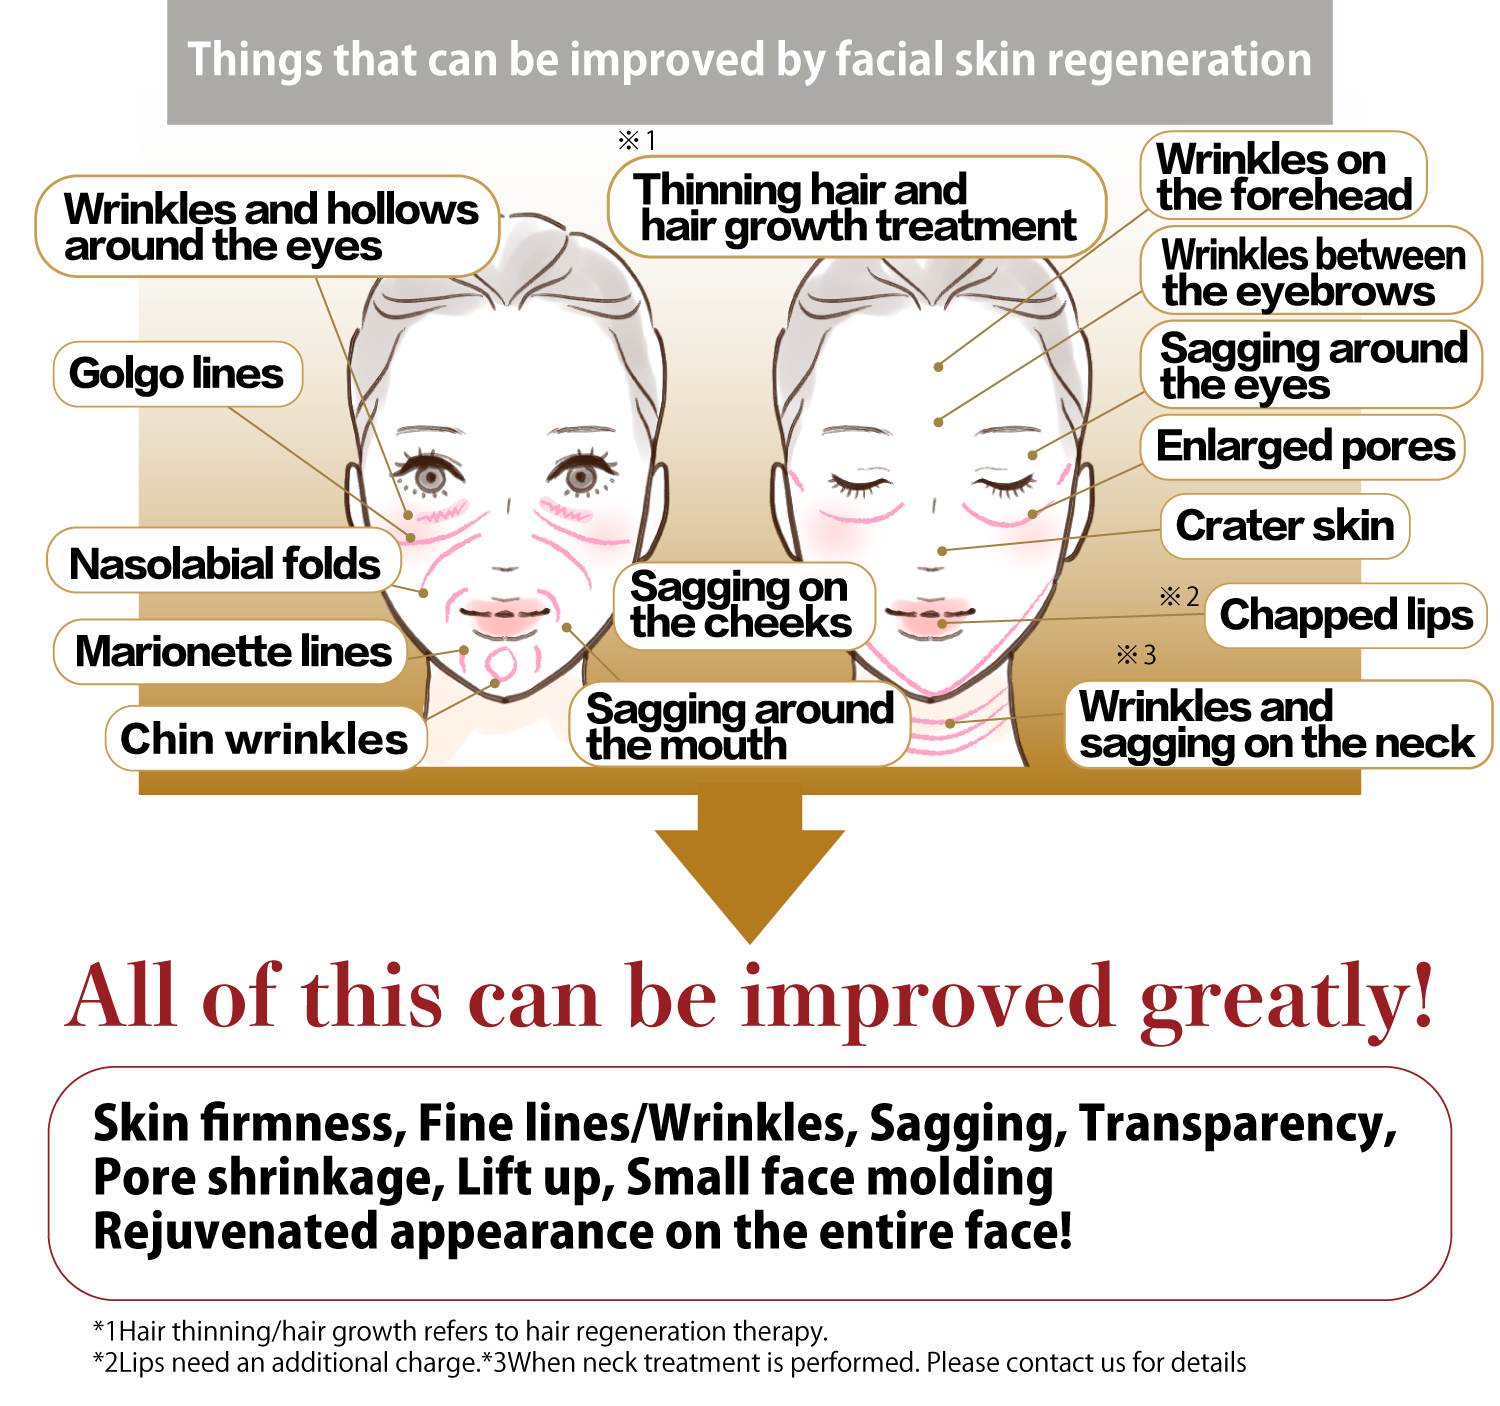 Things that can be improved by facial skin